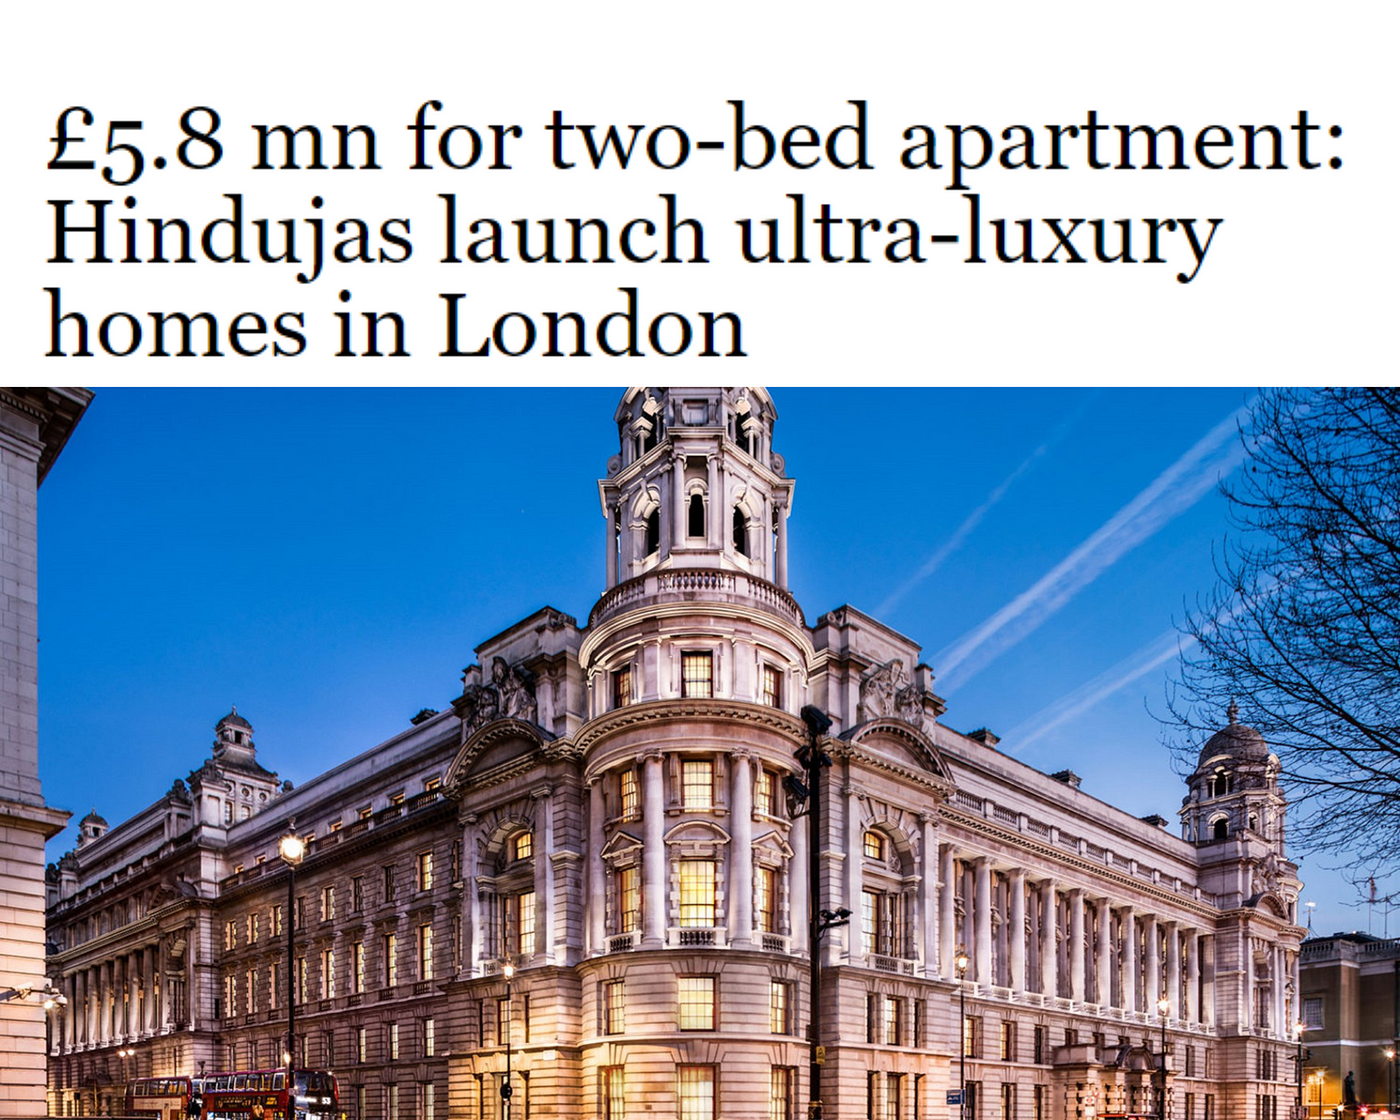 Hinduja Group has set the price of a luxurious 2-bed room flat at 59 Crore Rupees.